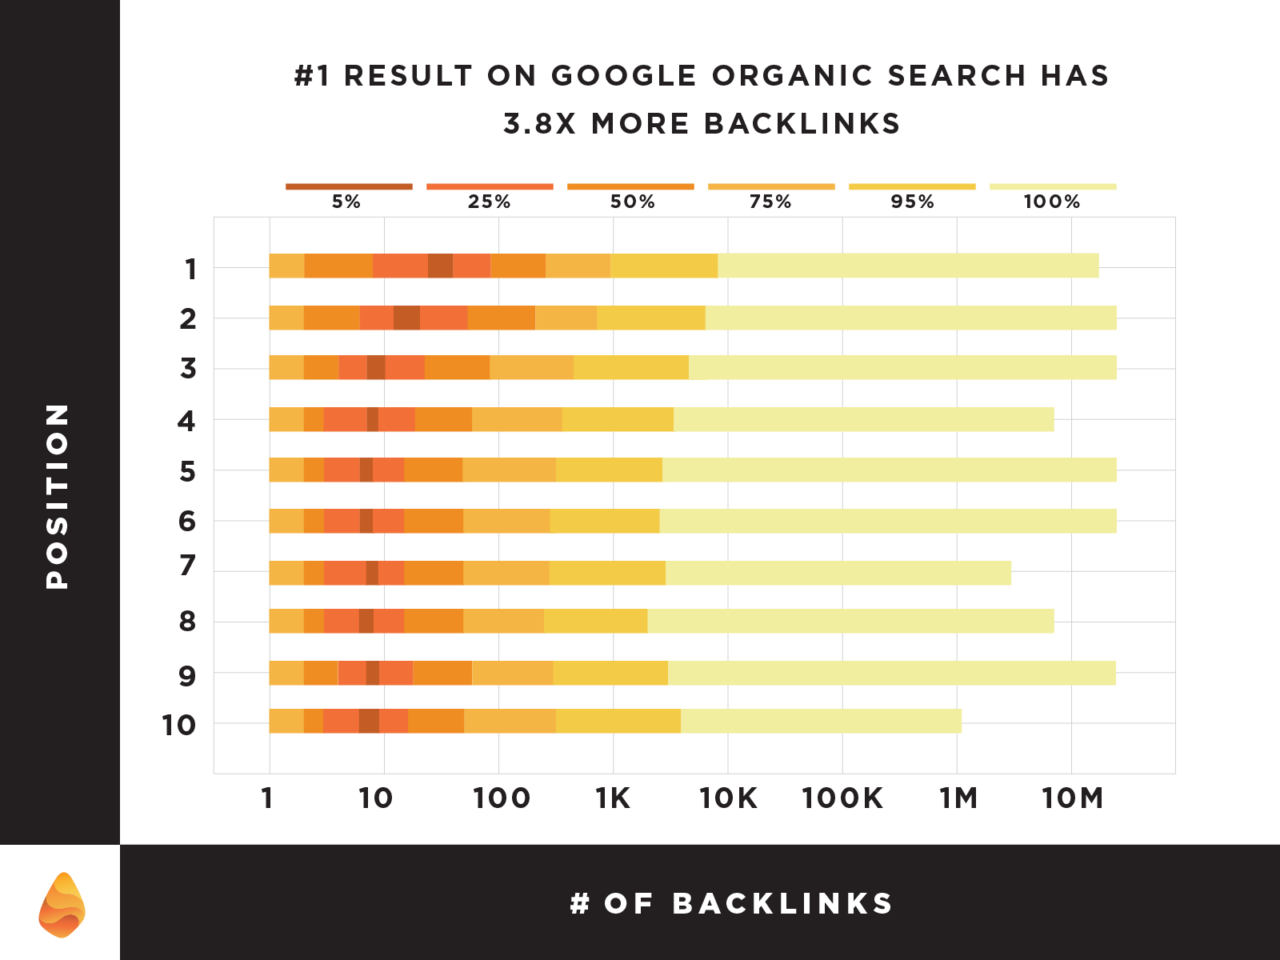 Graph showing the #1 result on Google have 3.8x more backlinks